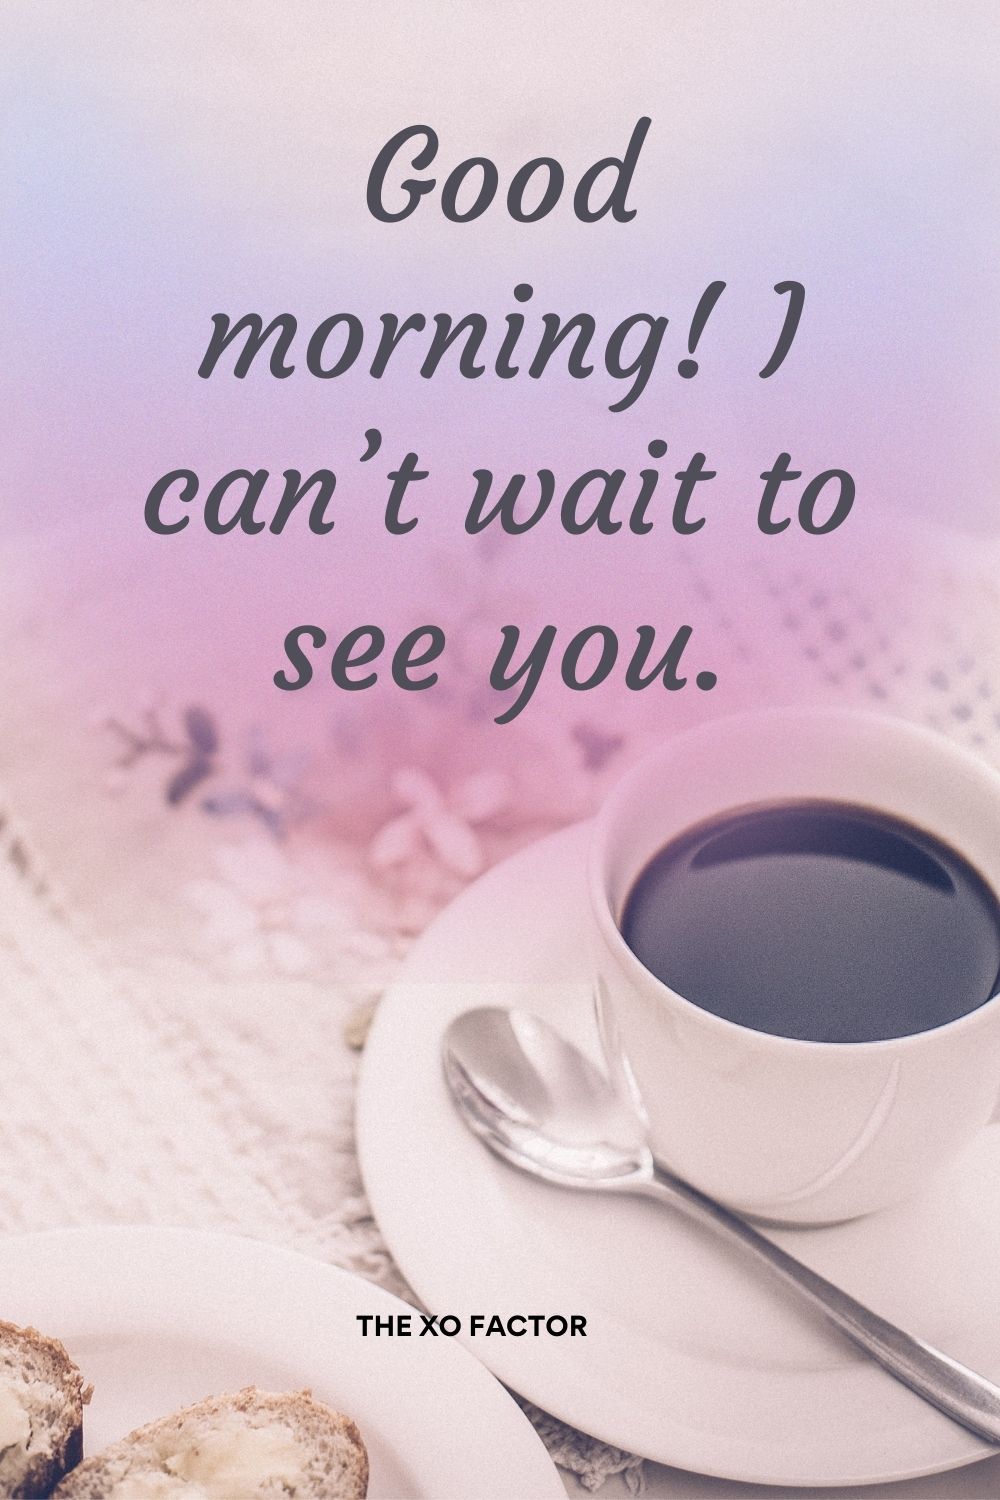 Good morning! I can’t wait to see you.